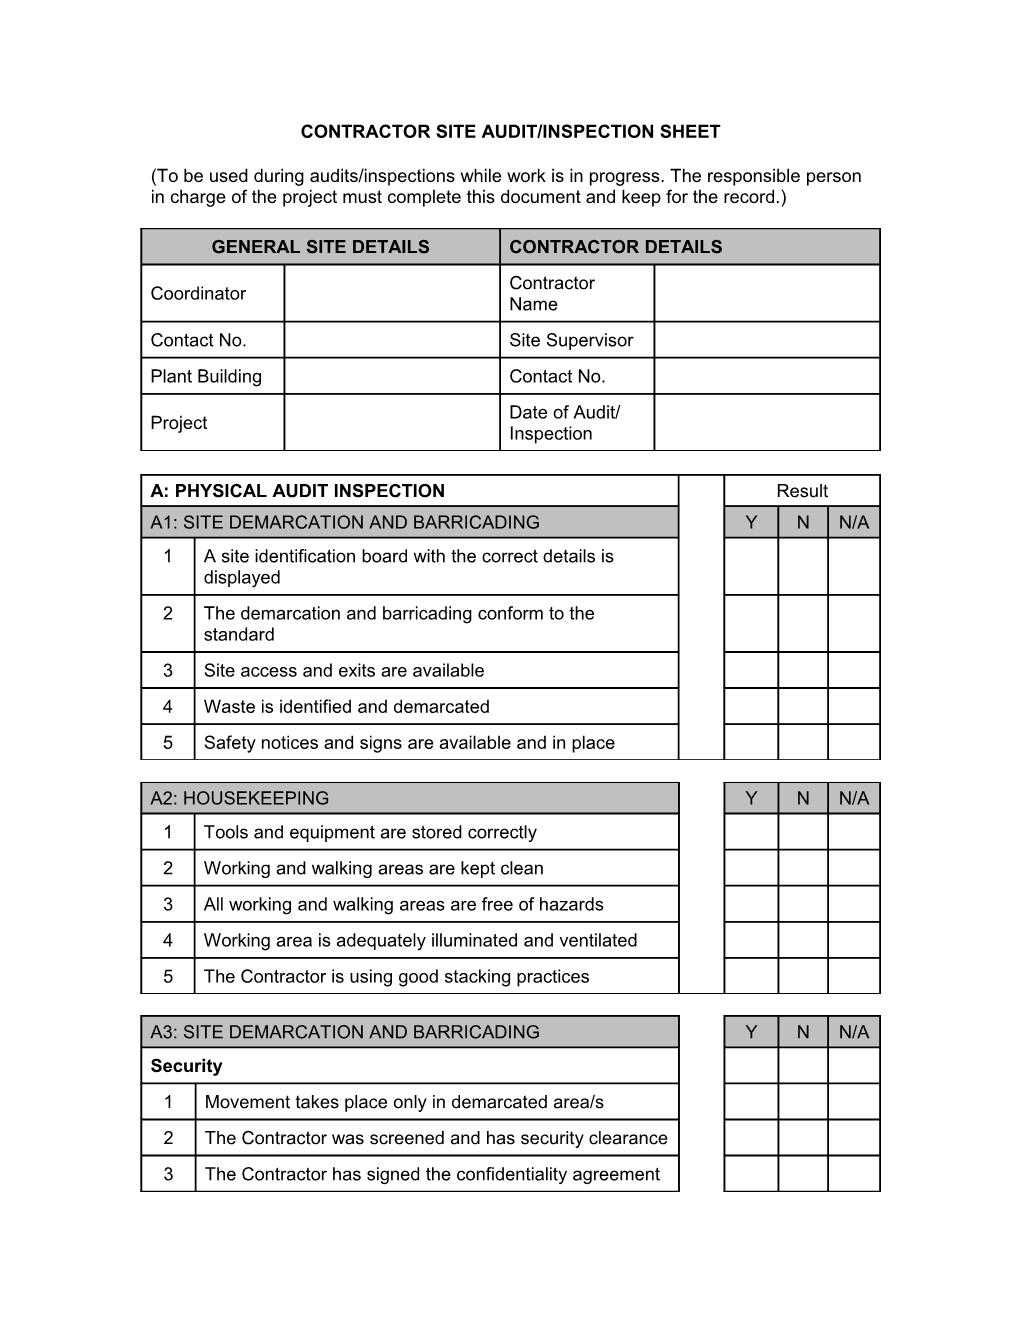 Contractor Site Audit/Inspection Sheet